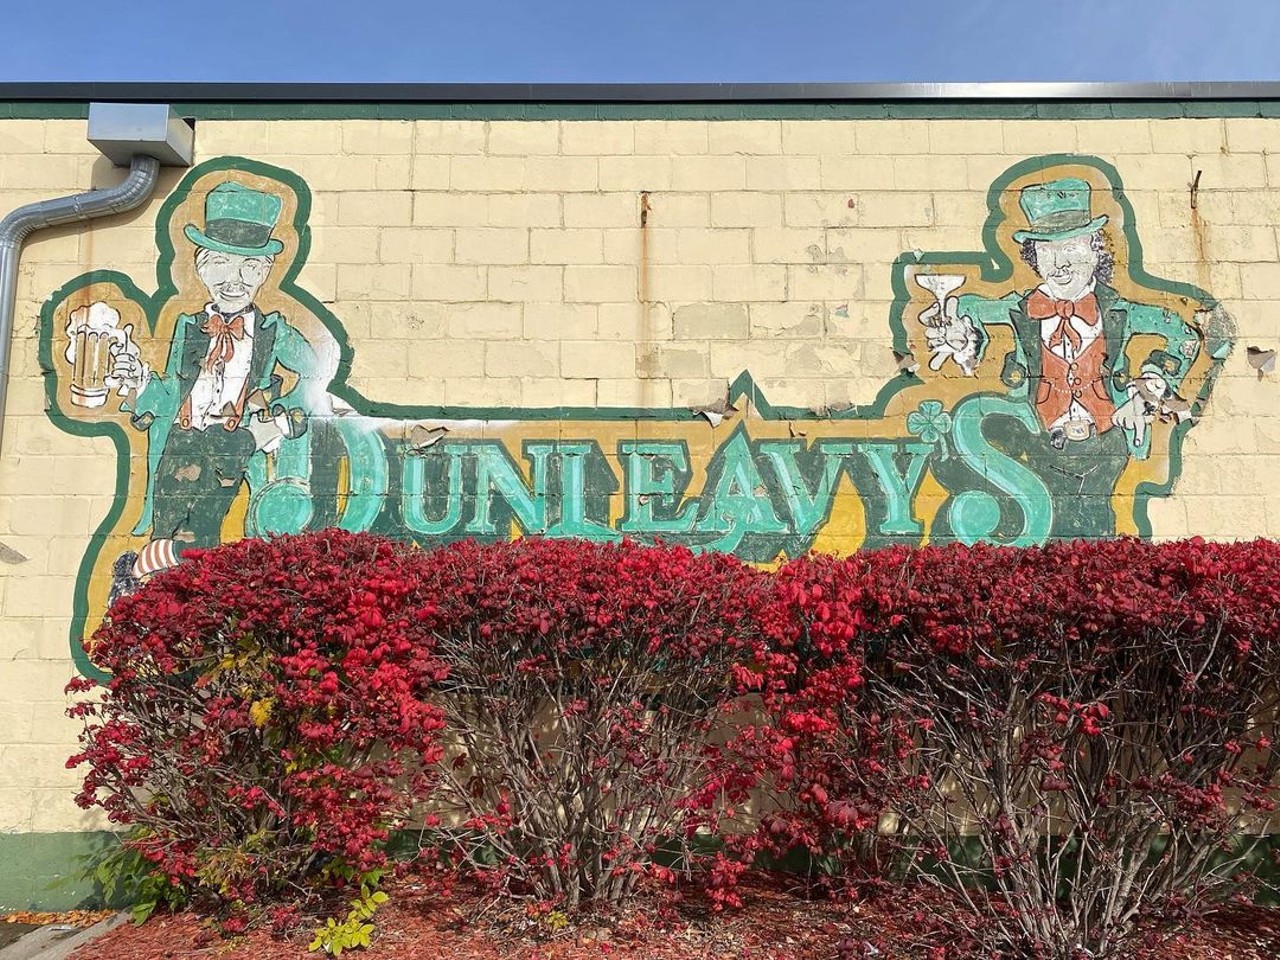 Dunleavy’s
6004 Allen Rd., Allen Park; 313-382-4545; dunleavypub.com 
Founded by brothers, this Downriver neighborhood favorite features a menu of typical bar fare with some Irish staples.